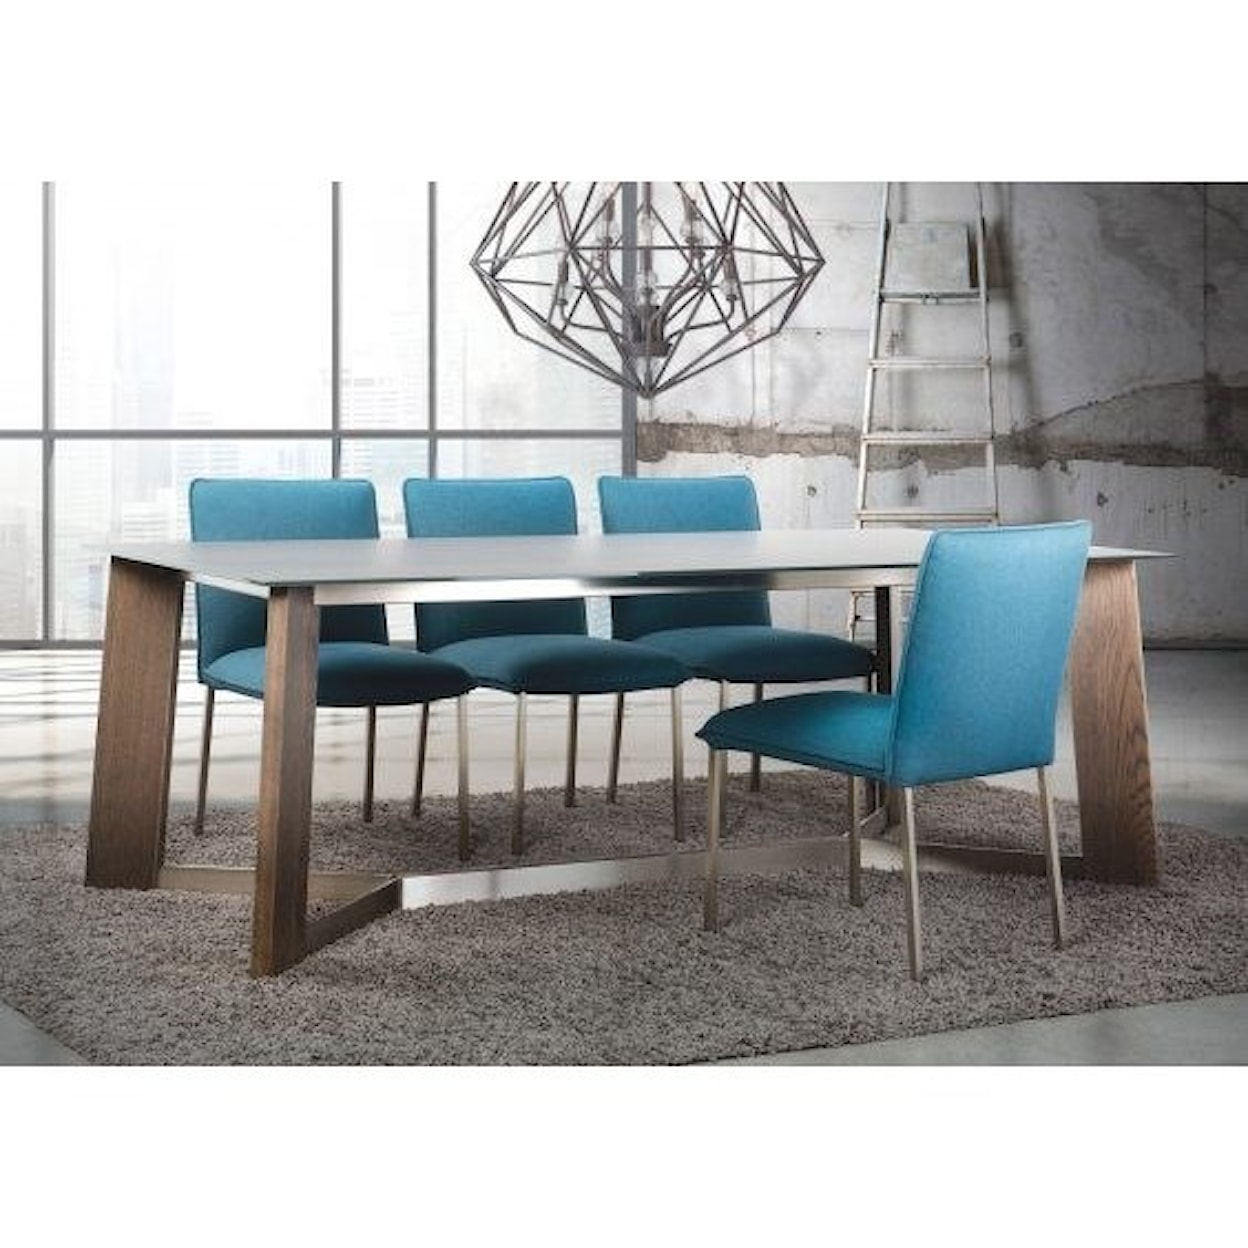 Trica Contemporary Tables Dining Room Table